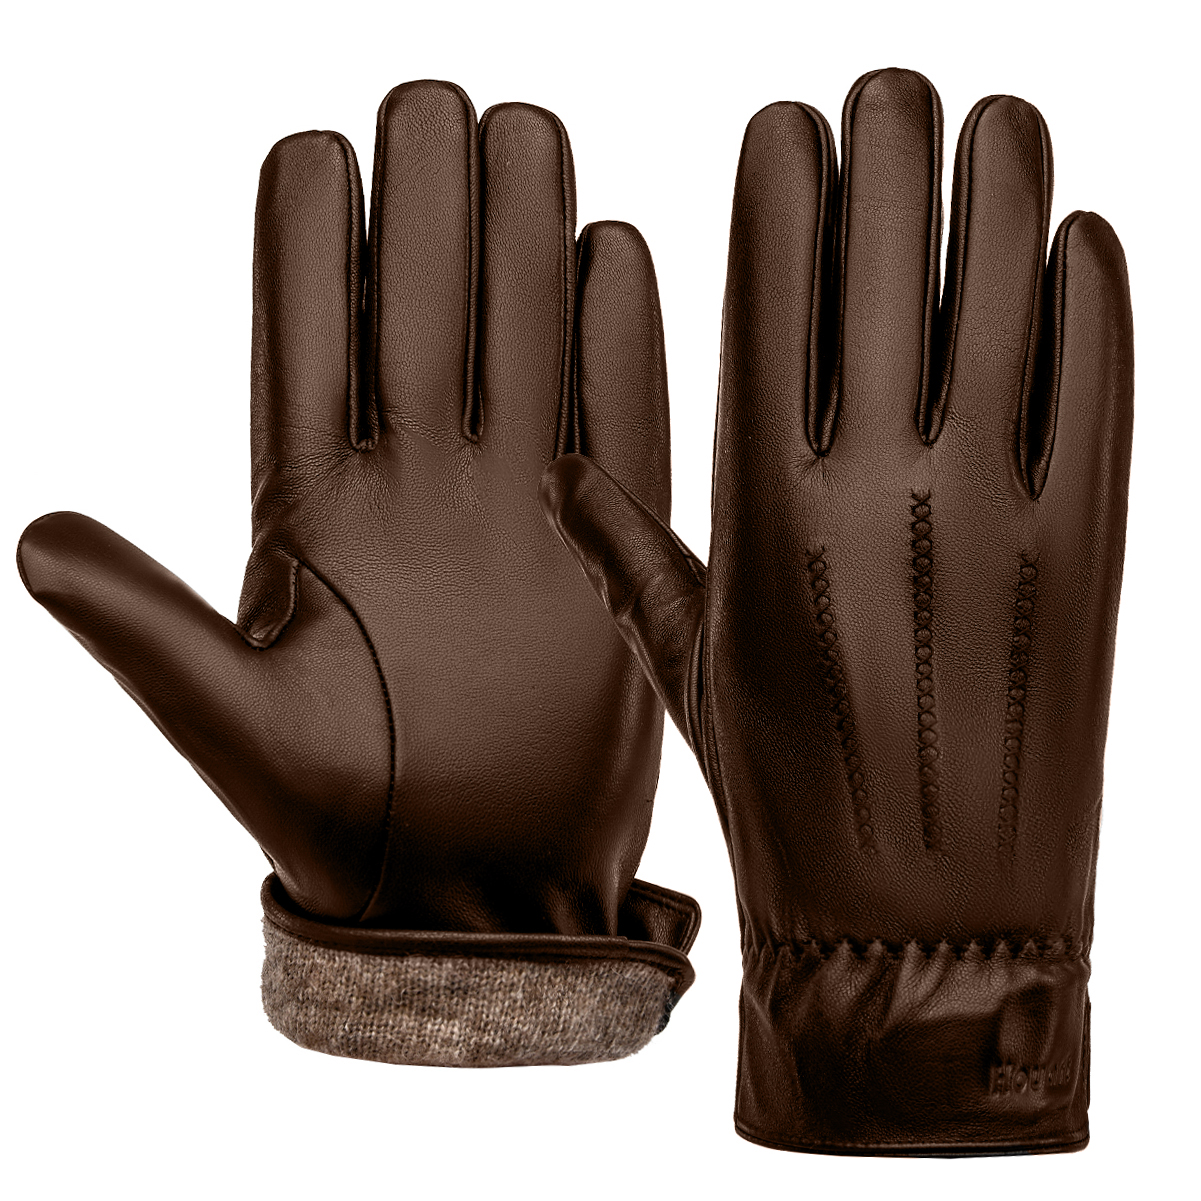 Outdoor Plus Leather Gloves for Men,Sheepskin Driving Gloves Touchscreen, Gift-Brown - image 1 of 6